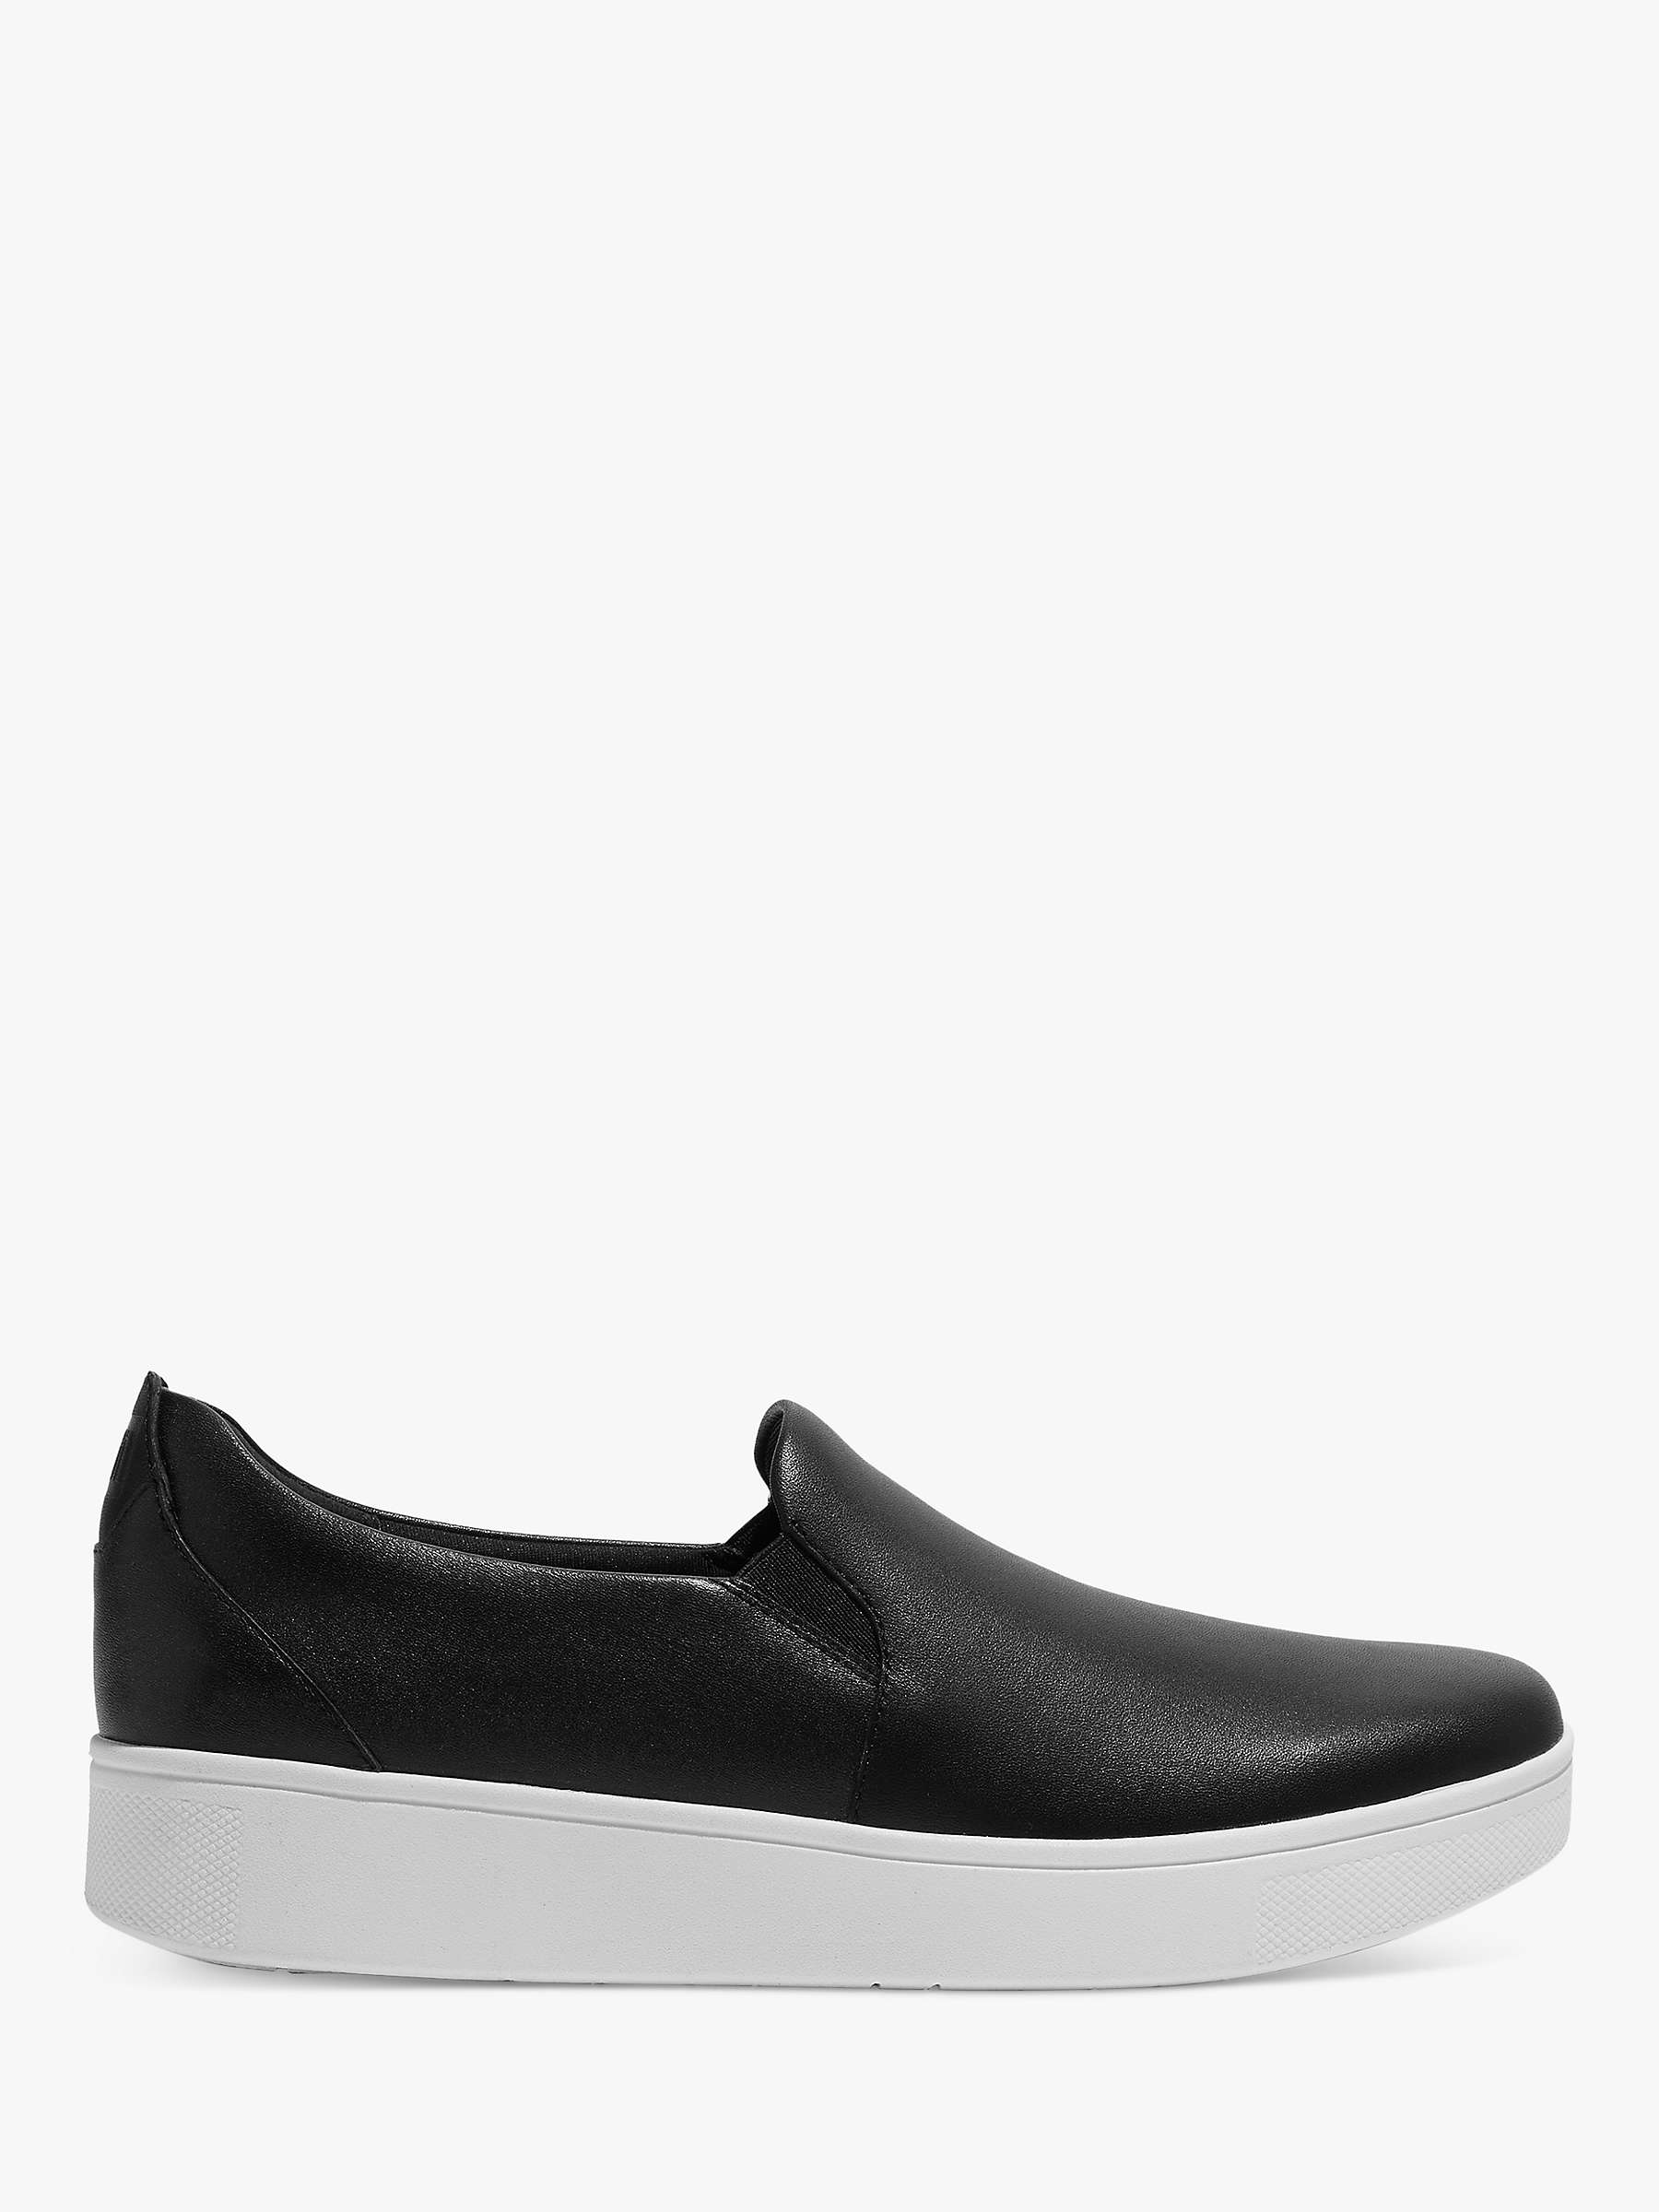 FitFlop Rally Leather Slip On Skate Trainers, Black at John Lewis ...